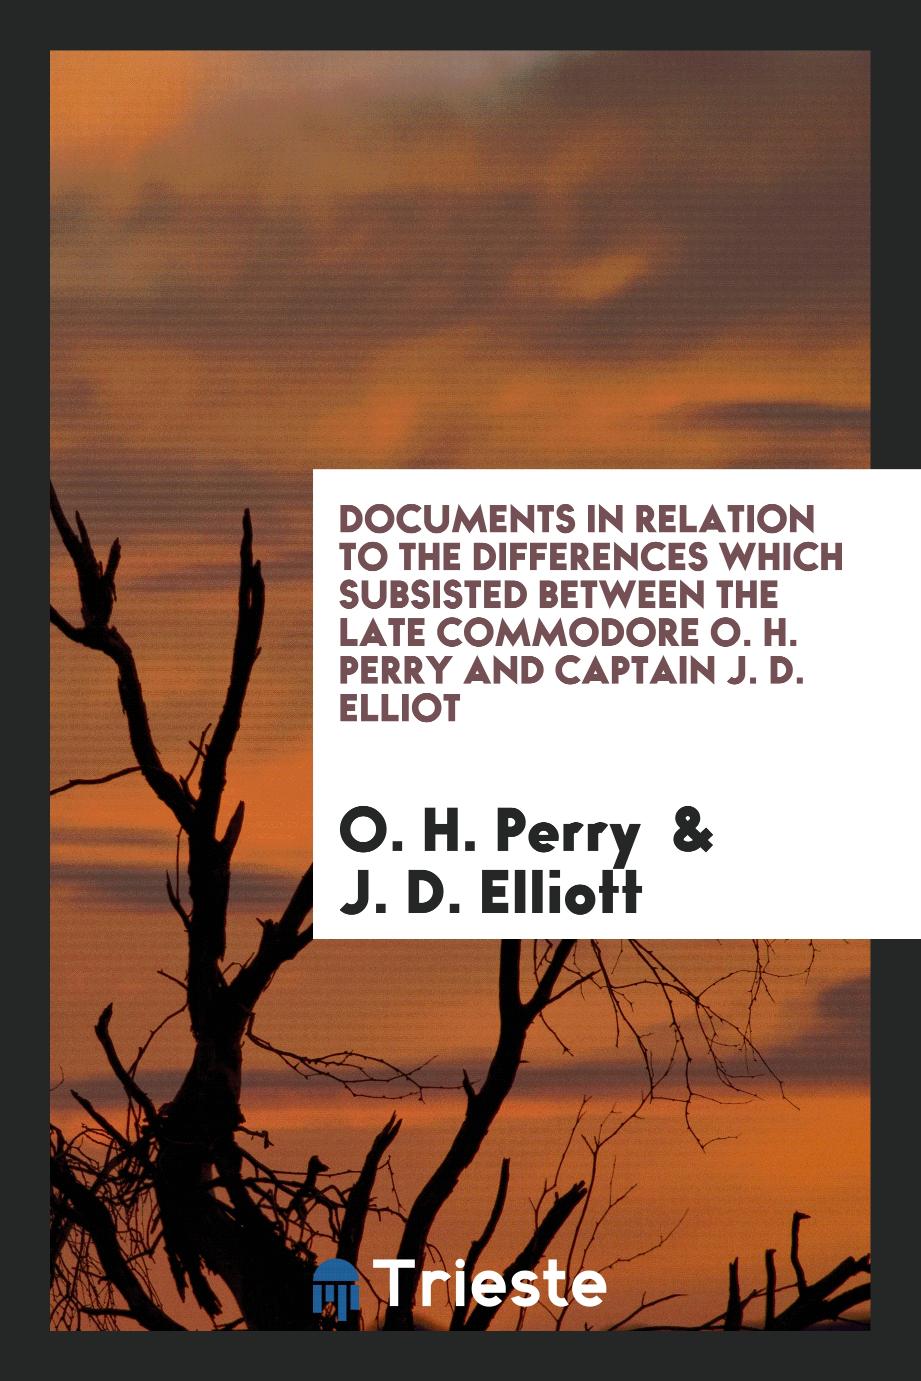 Documents in Relation to the Differences which Subsisted Between the Late Commodore O. H. Perry and Captain J. D. Elliot